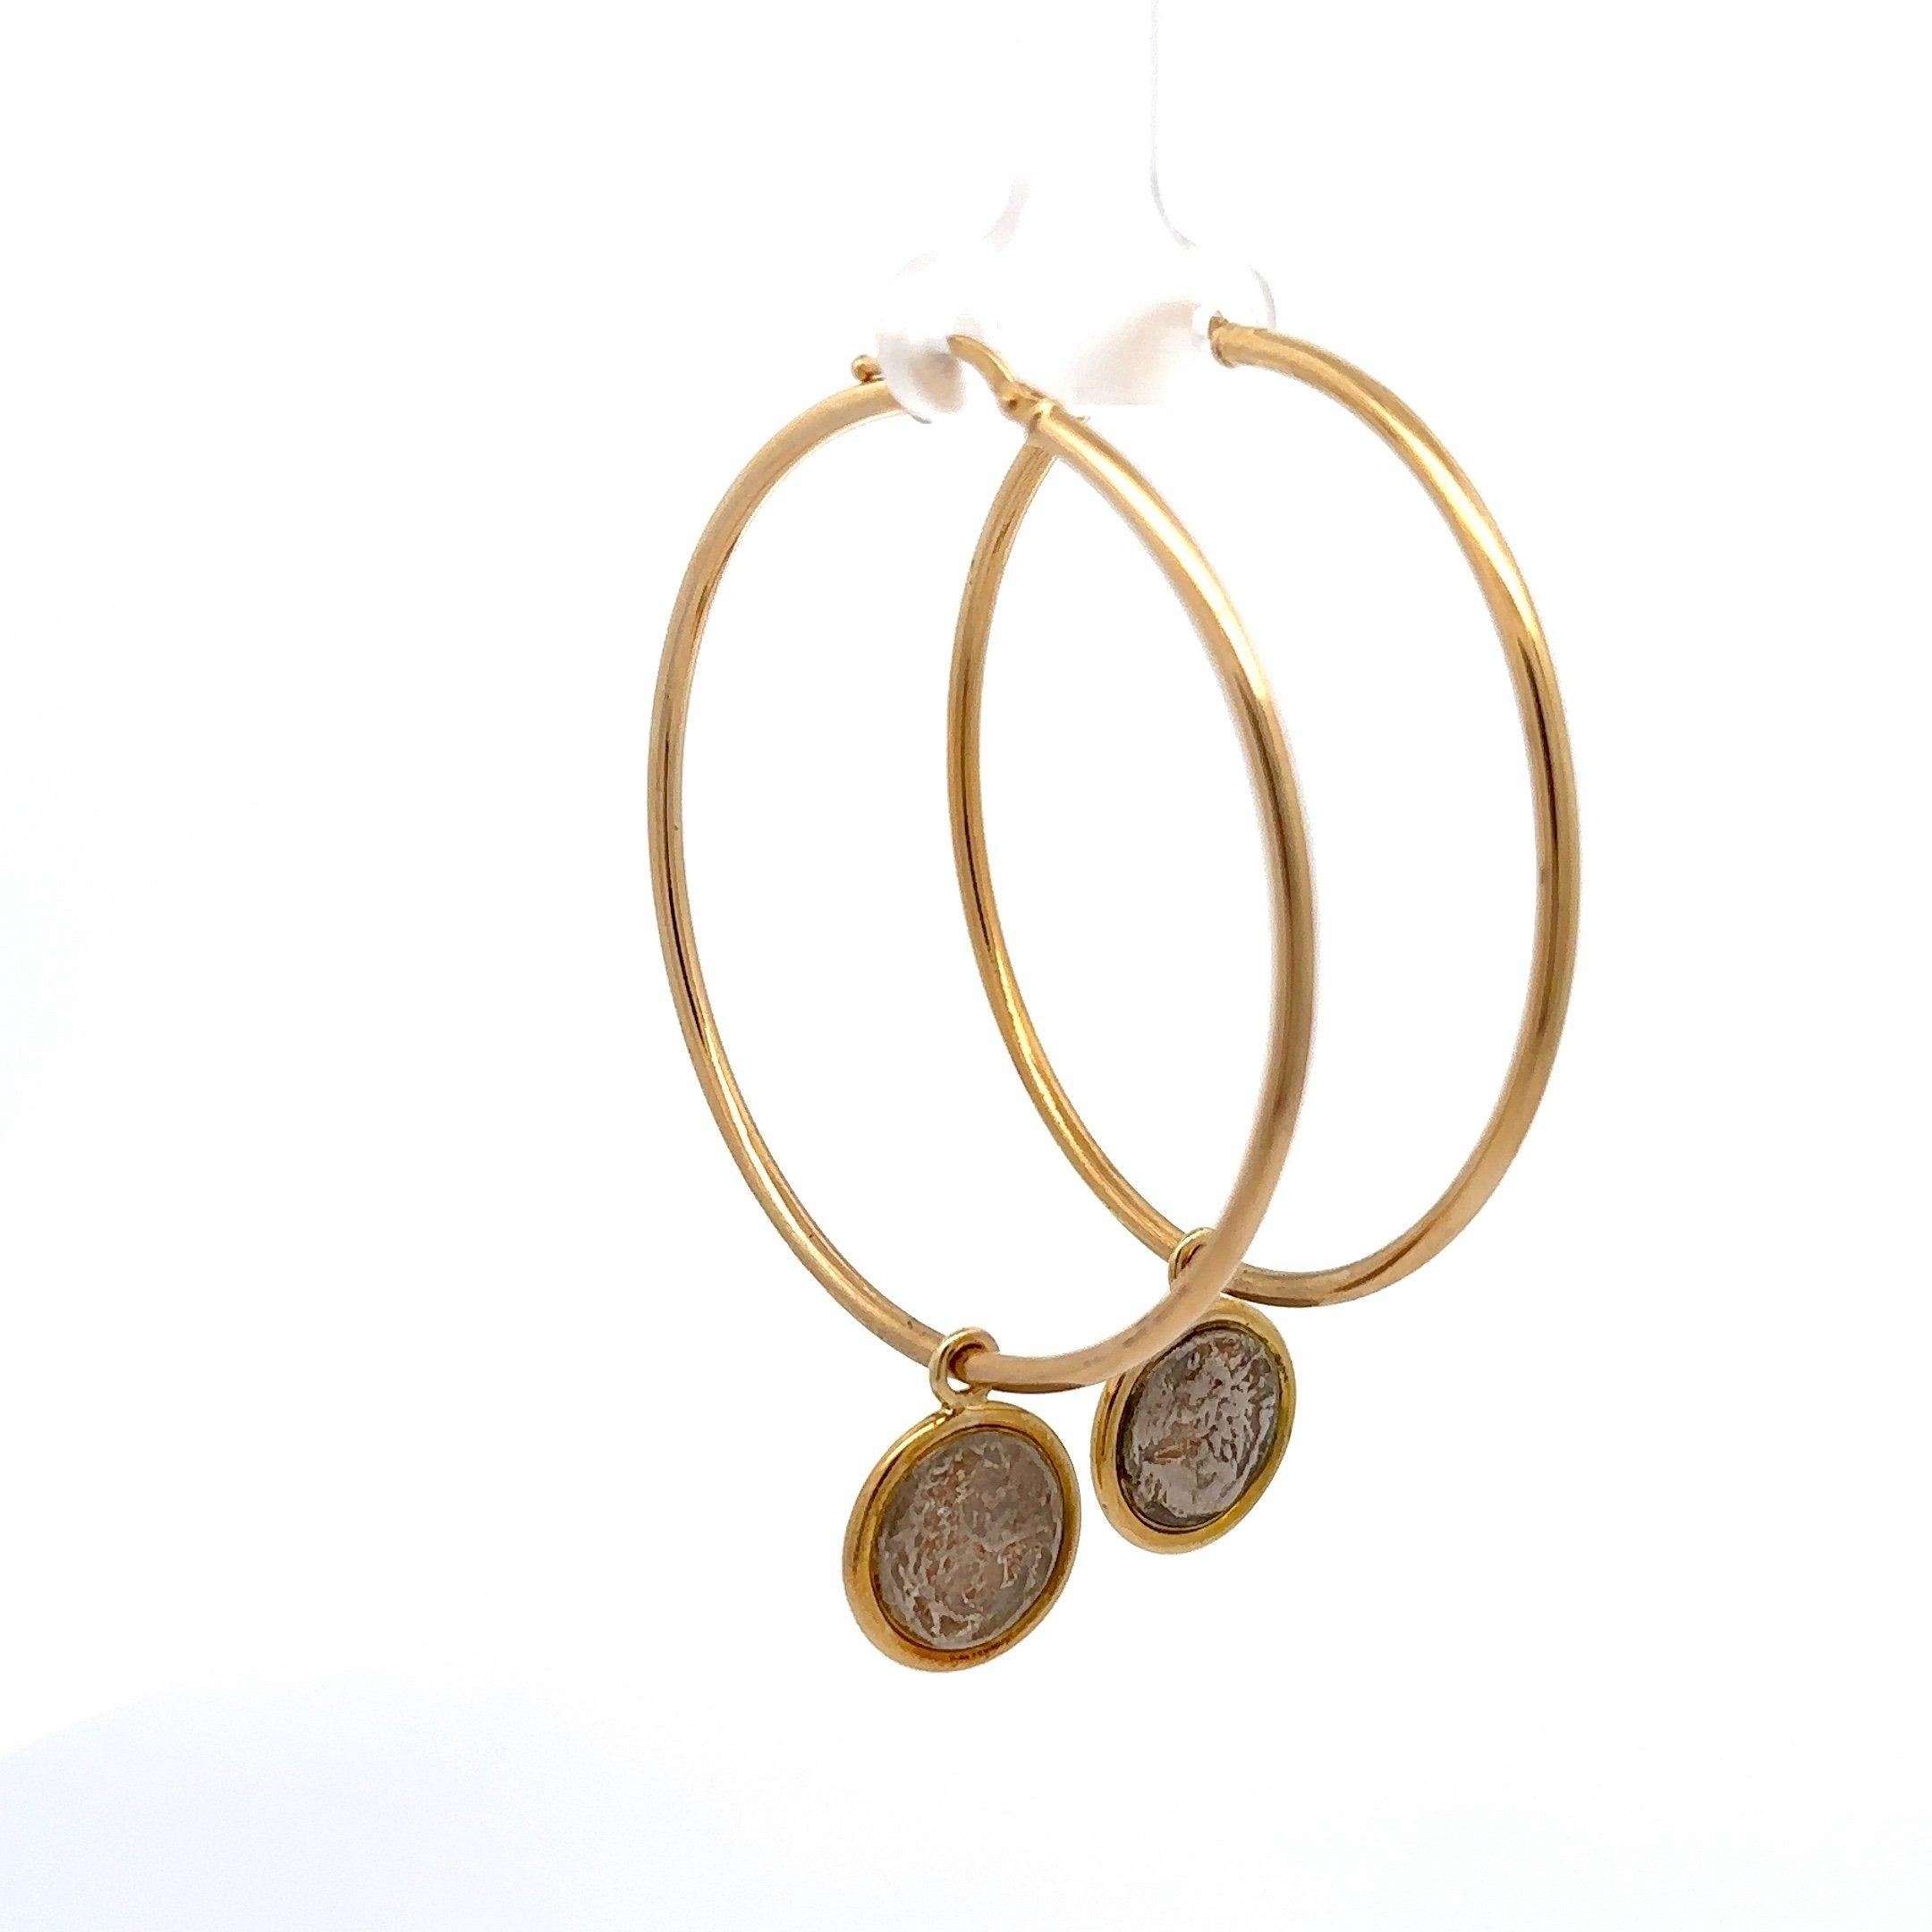 Dubini 18KT Yellow Gold Large Hoop Earrings with Silver Lion Coins 1